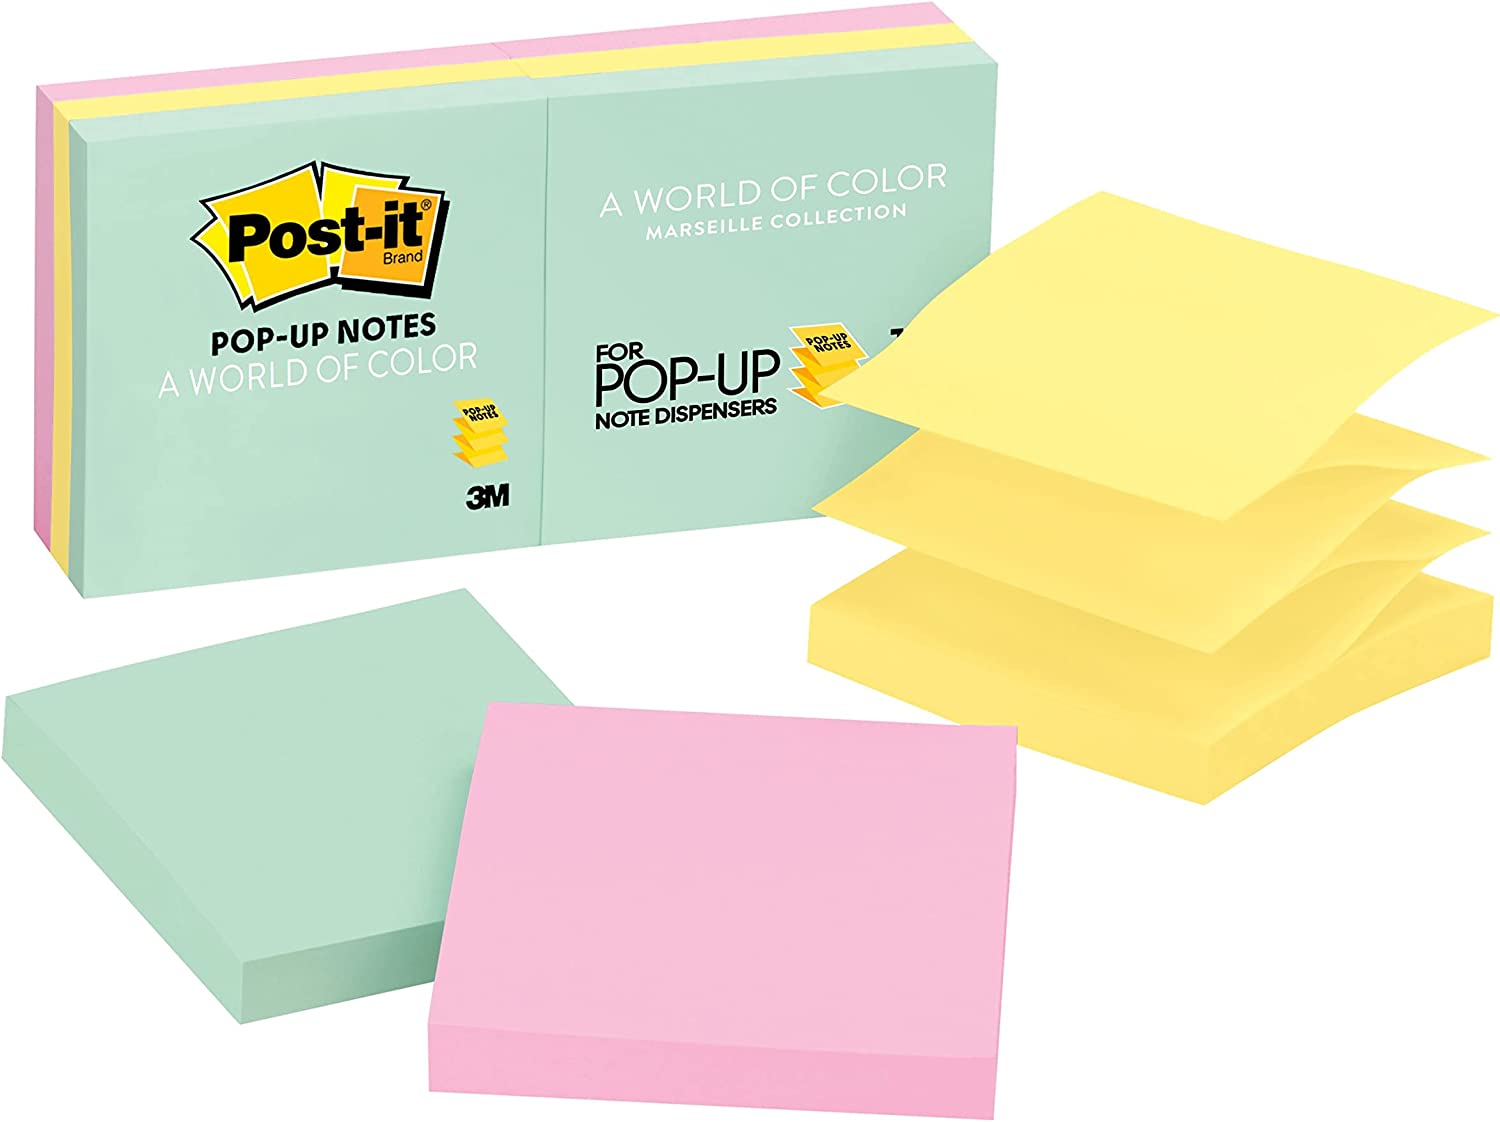 ''POST-IT Pop-up NOTES, 3x3 in, 6 Pads, America's #1 Favorite Sticky NOTES, Beachside Caf Collection